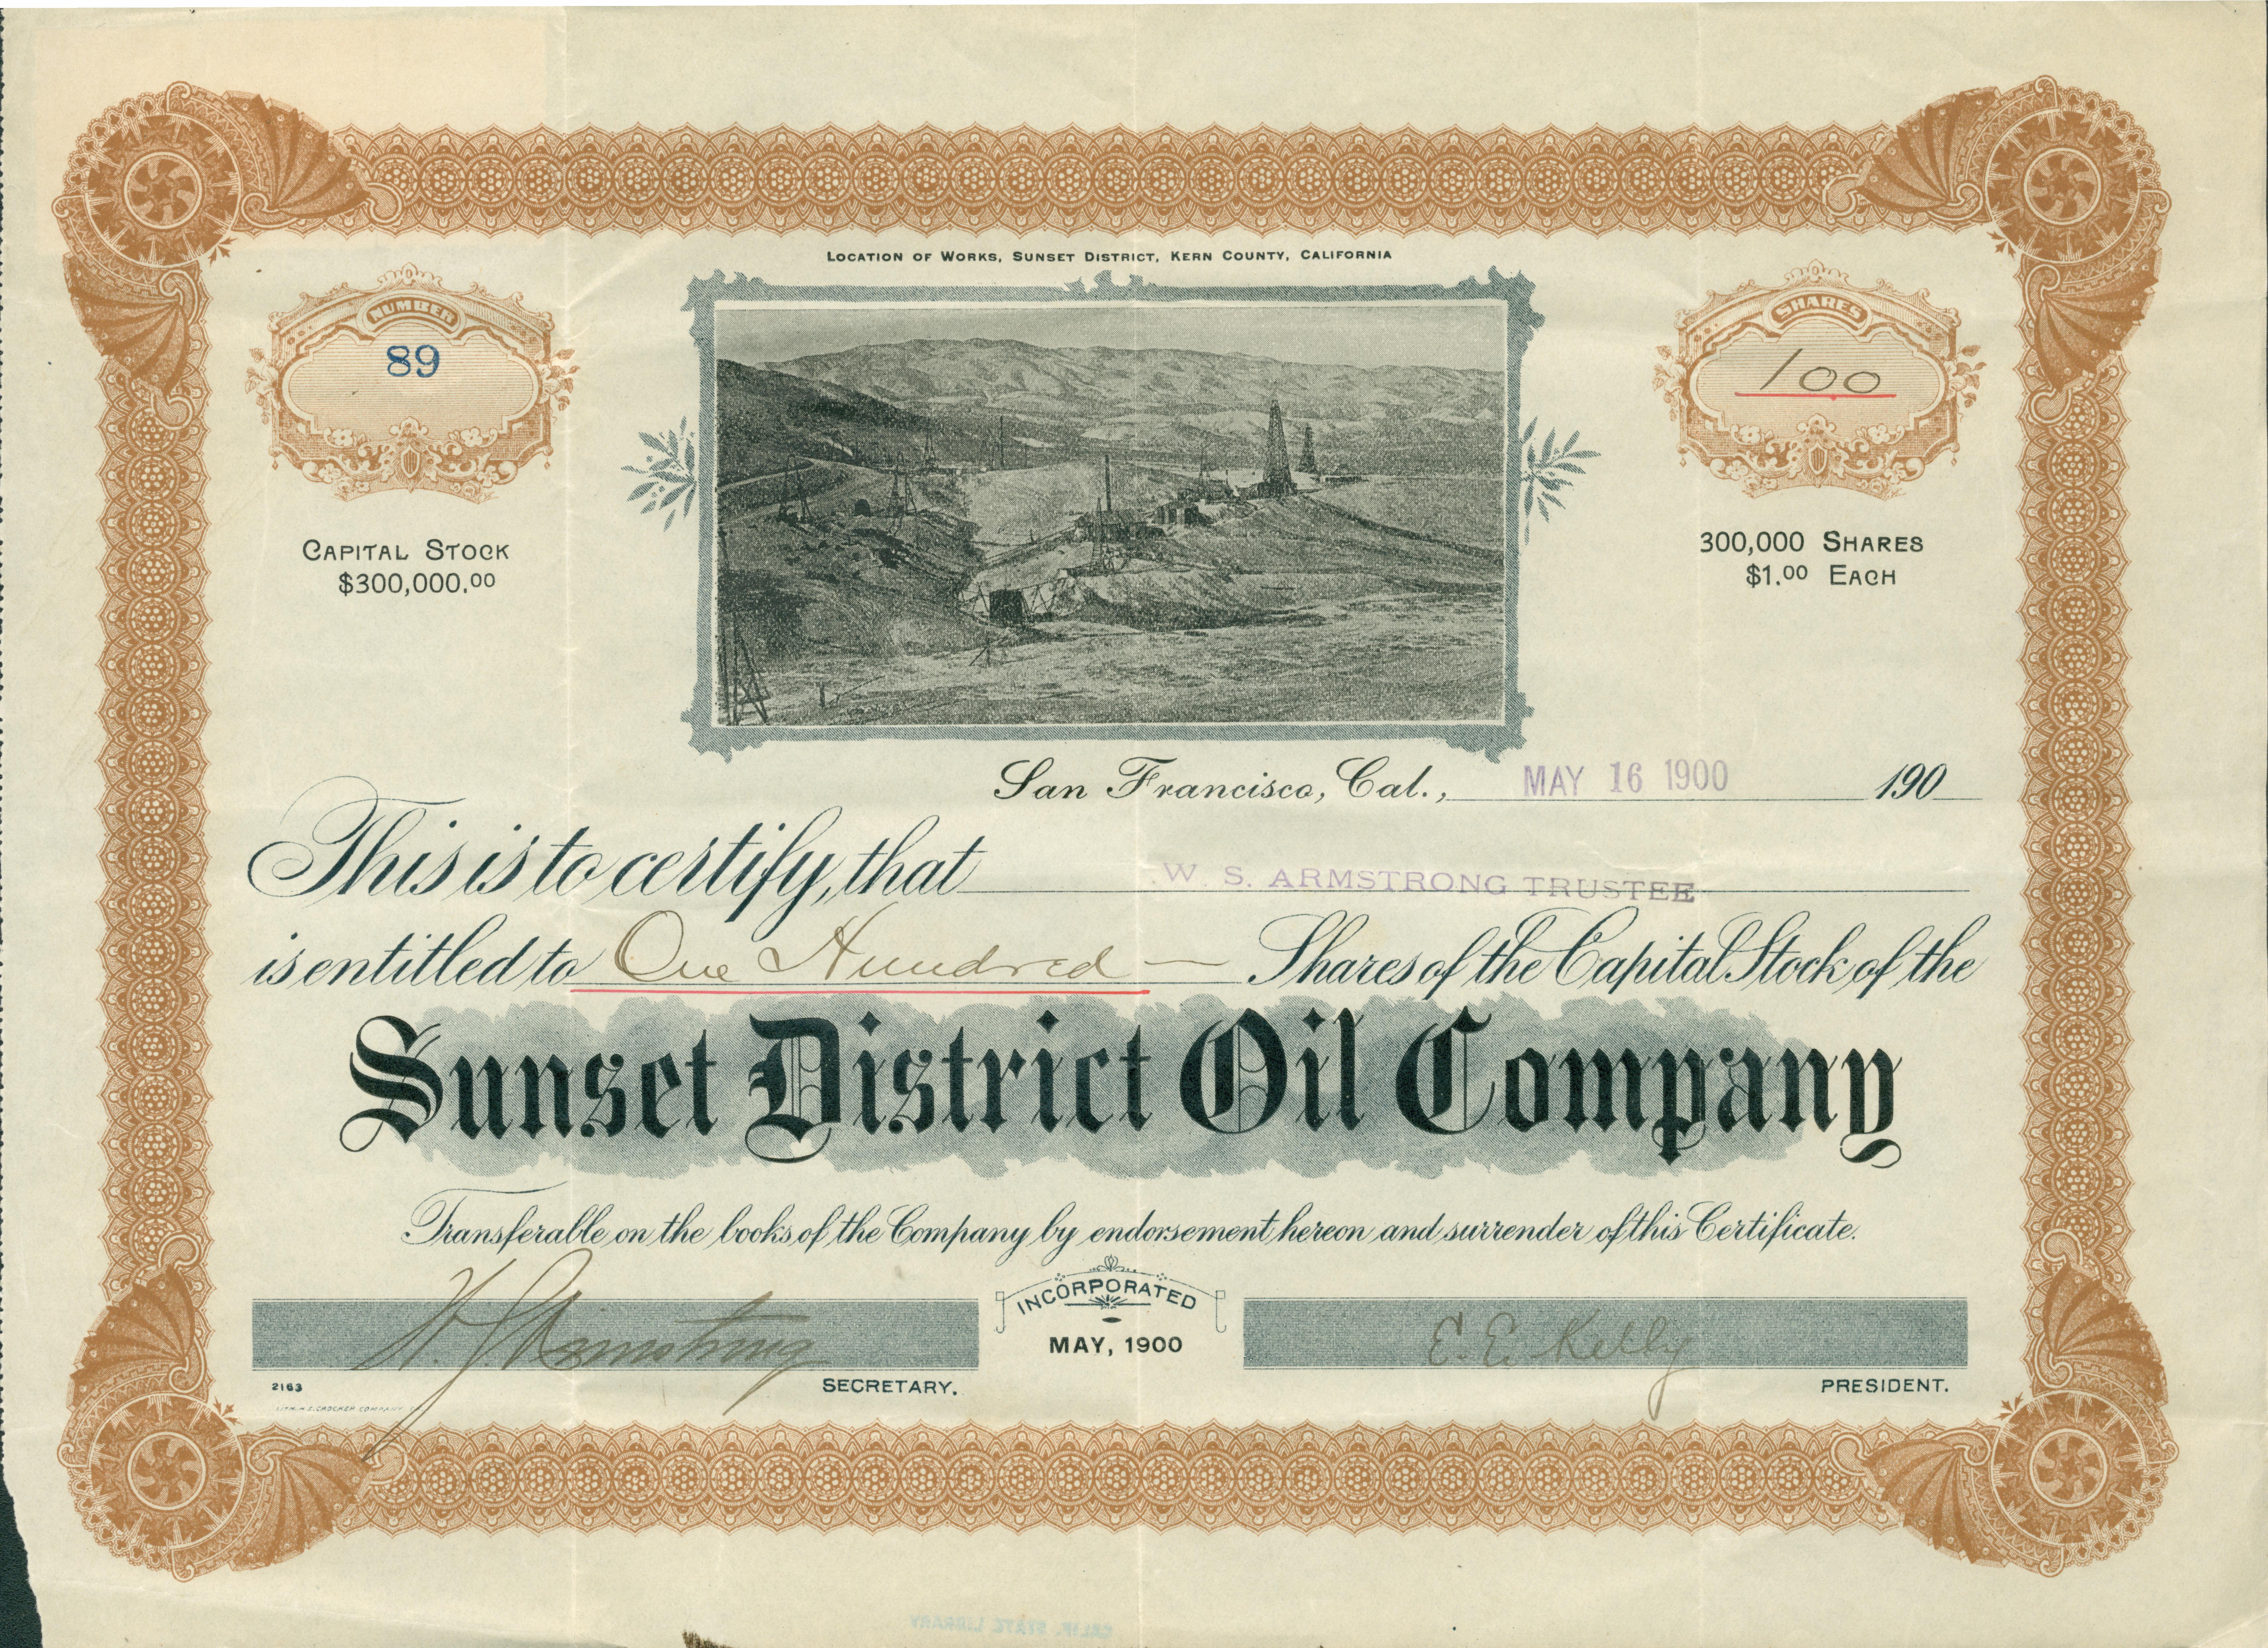 Certificate, No. 89, for 100 Shares, signed by W. S. Armstrong. H. S. Crocker, Lithographer, San Francisco.